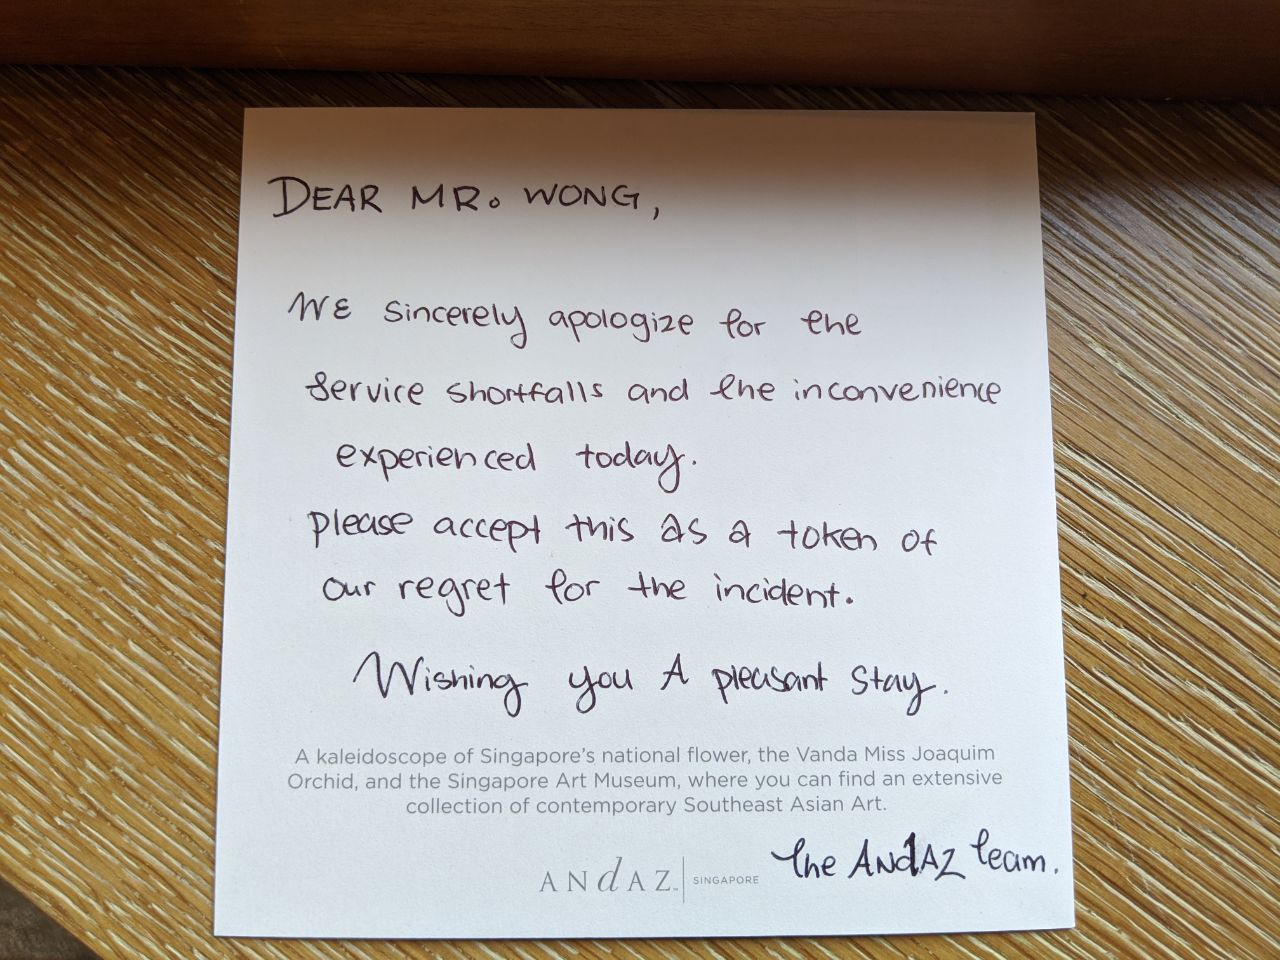 Andaz Singapore service recovery